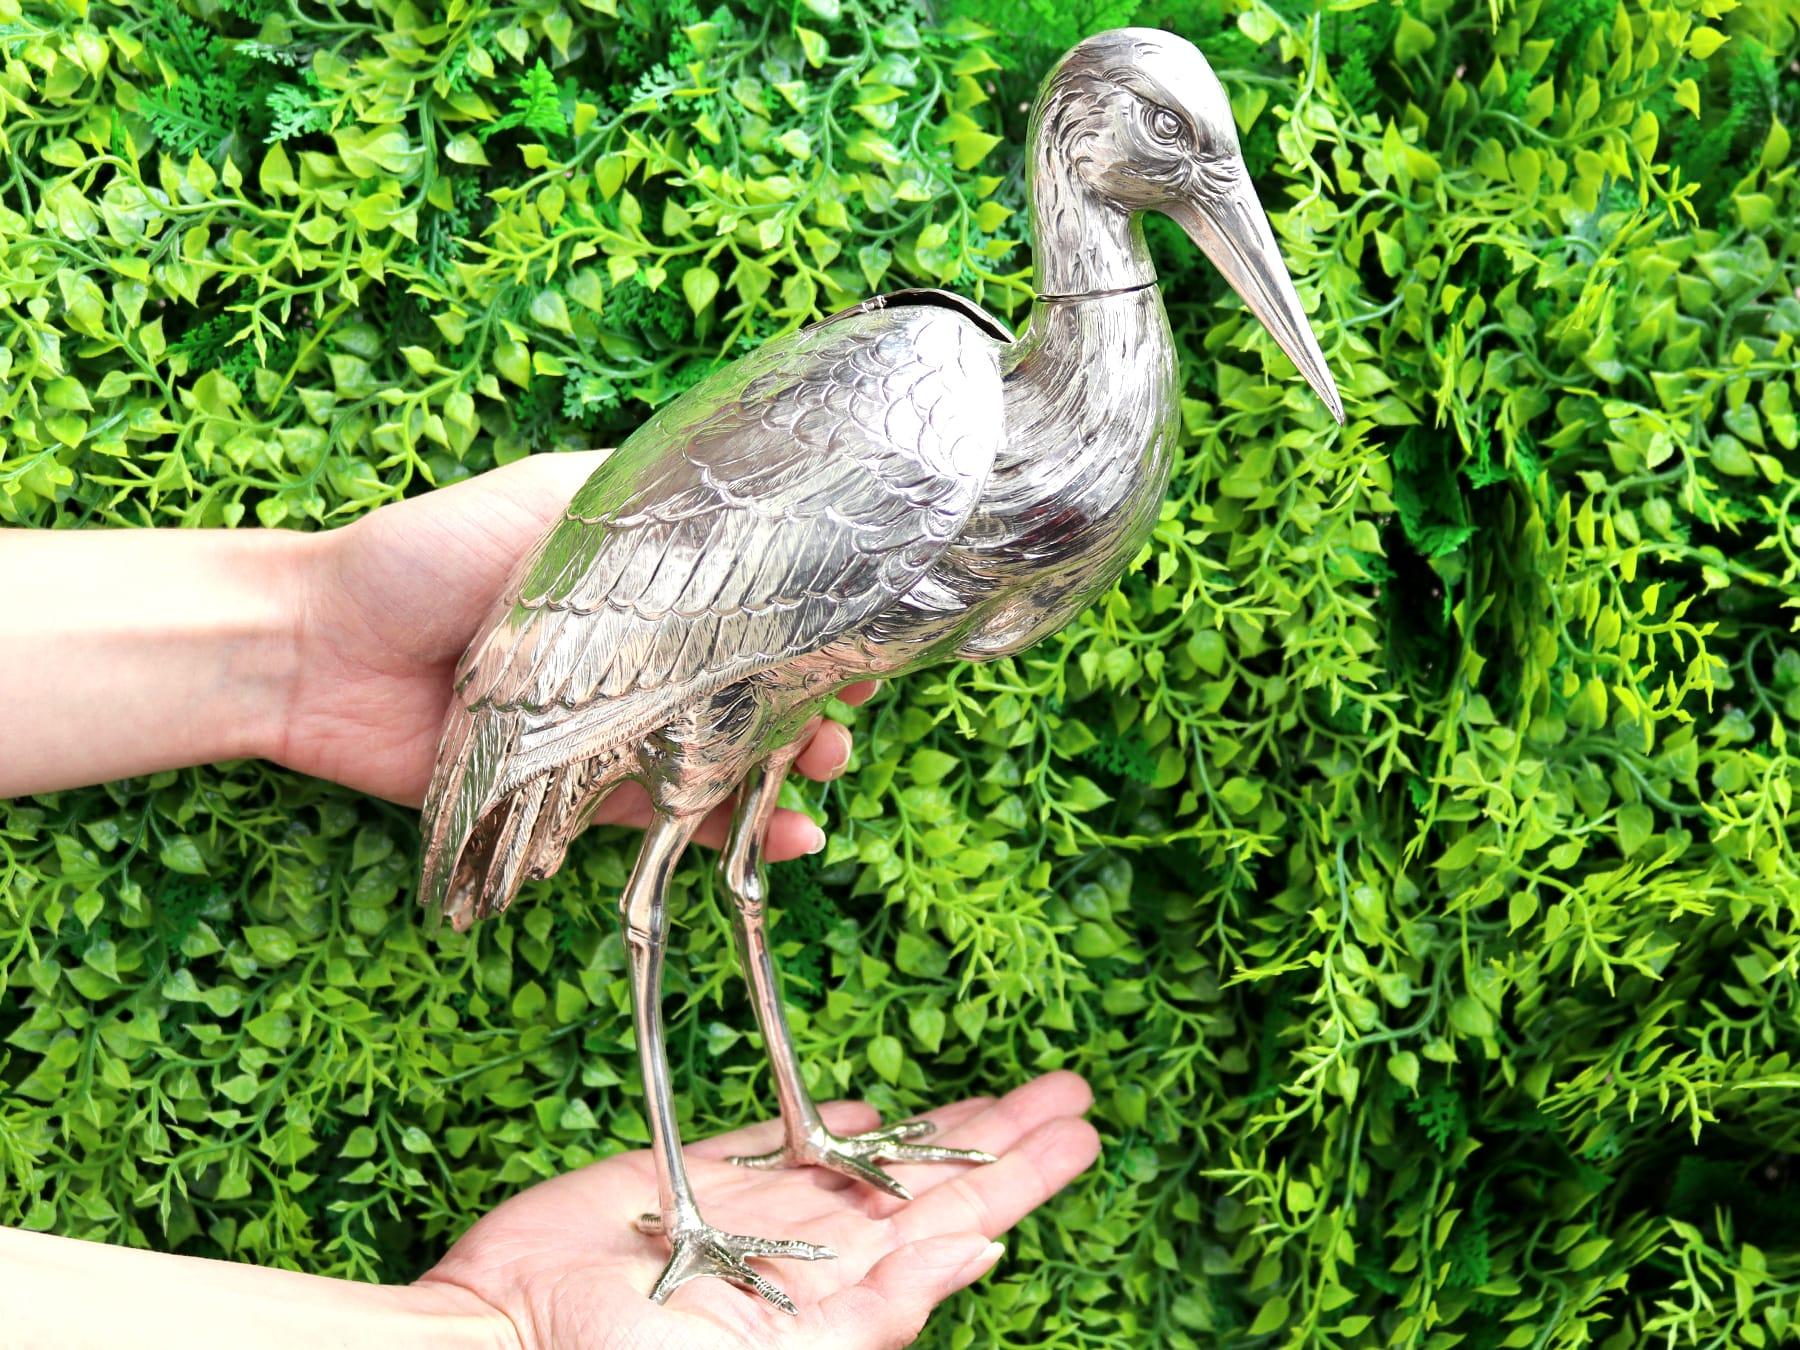 An exceptional, fine and impressive antique European silver sugar box modelled in the form of a stork; part of our collection of silver bird sugar boxes

This exceptional, fine and impressive antique cast 800 standard silver sugar box has been